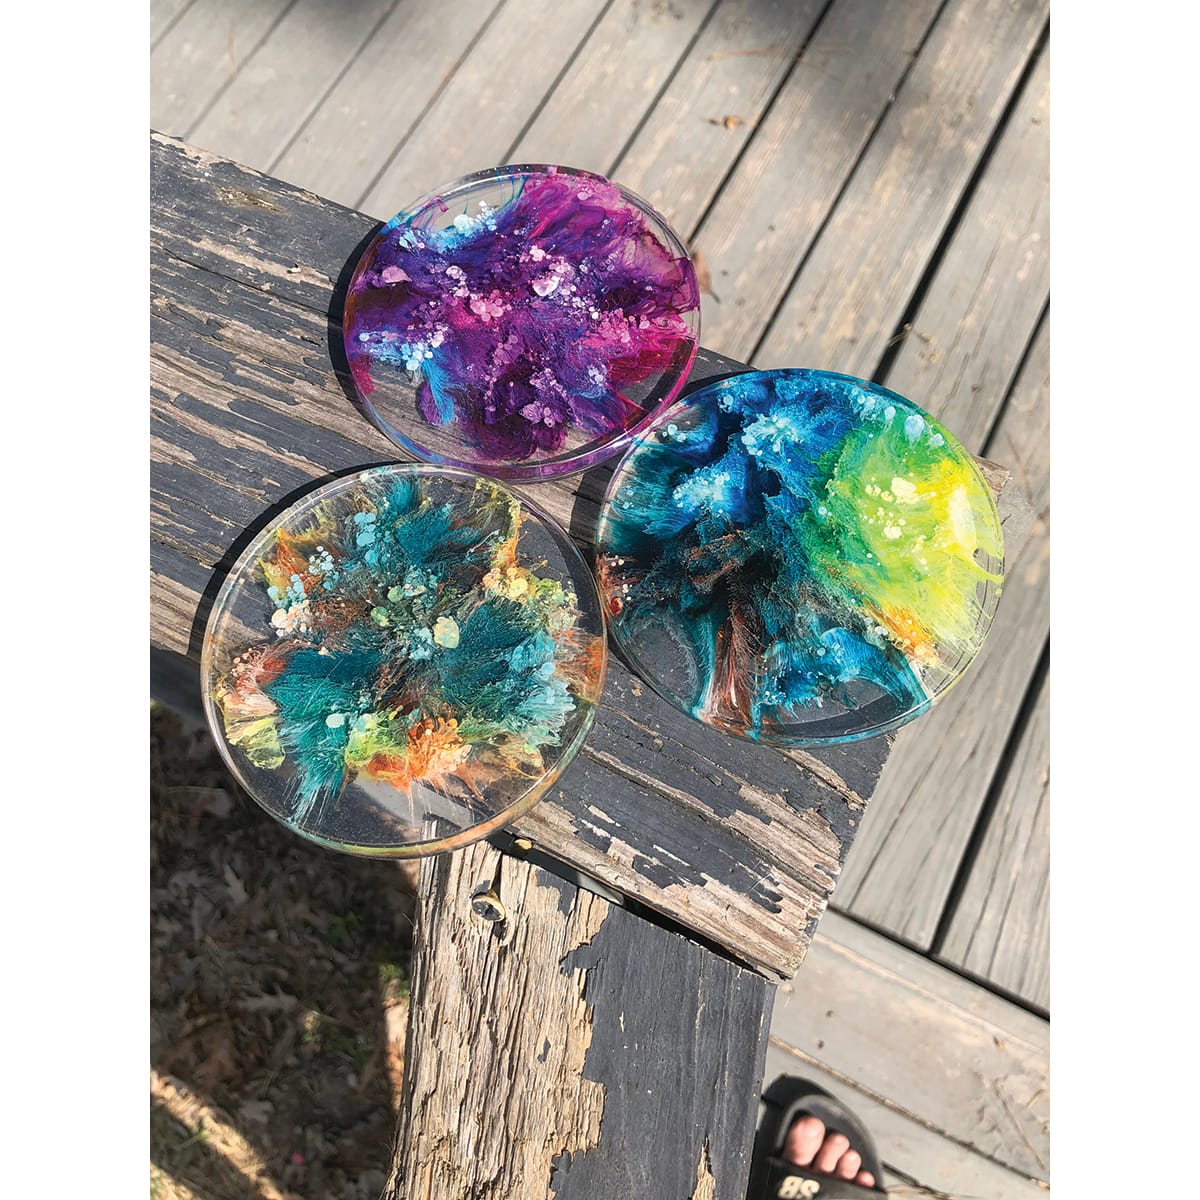 Resin Coasters & Stand Kit by Craft Smart | Michaels